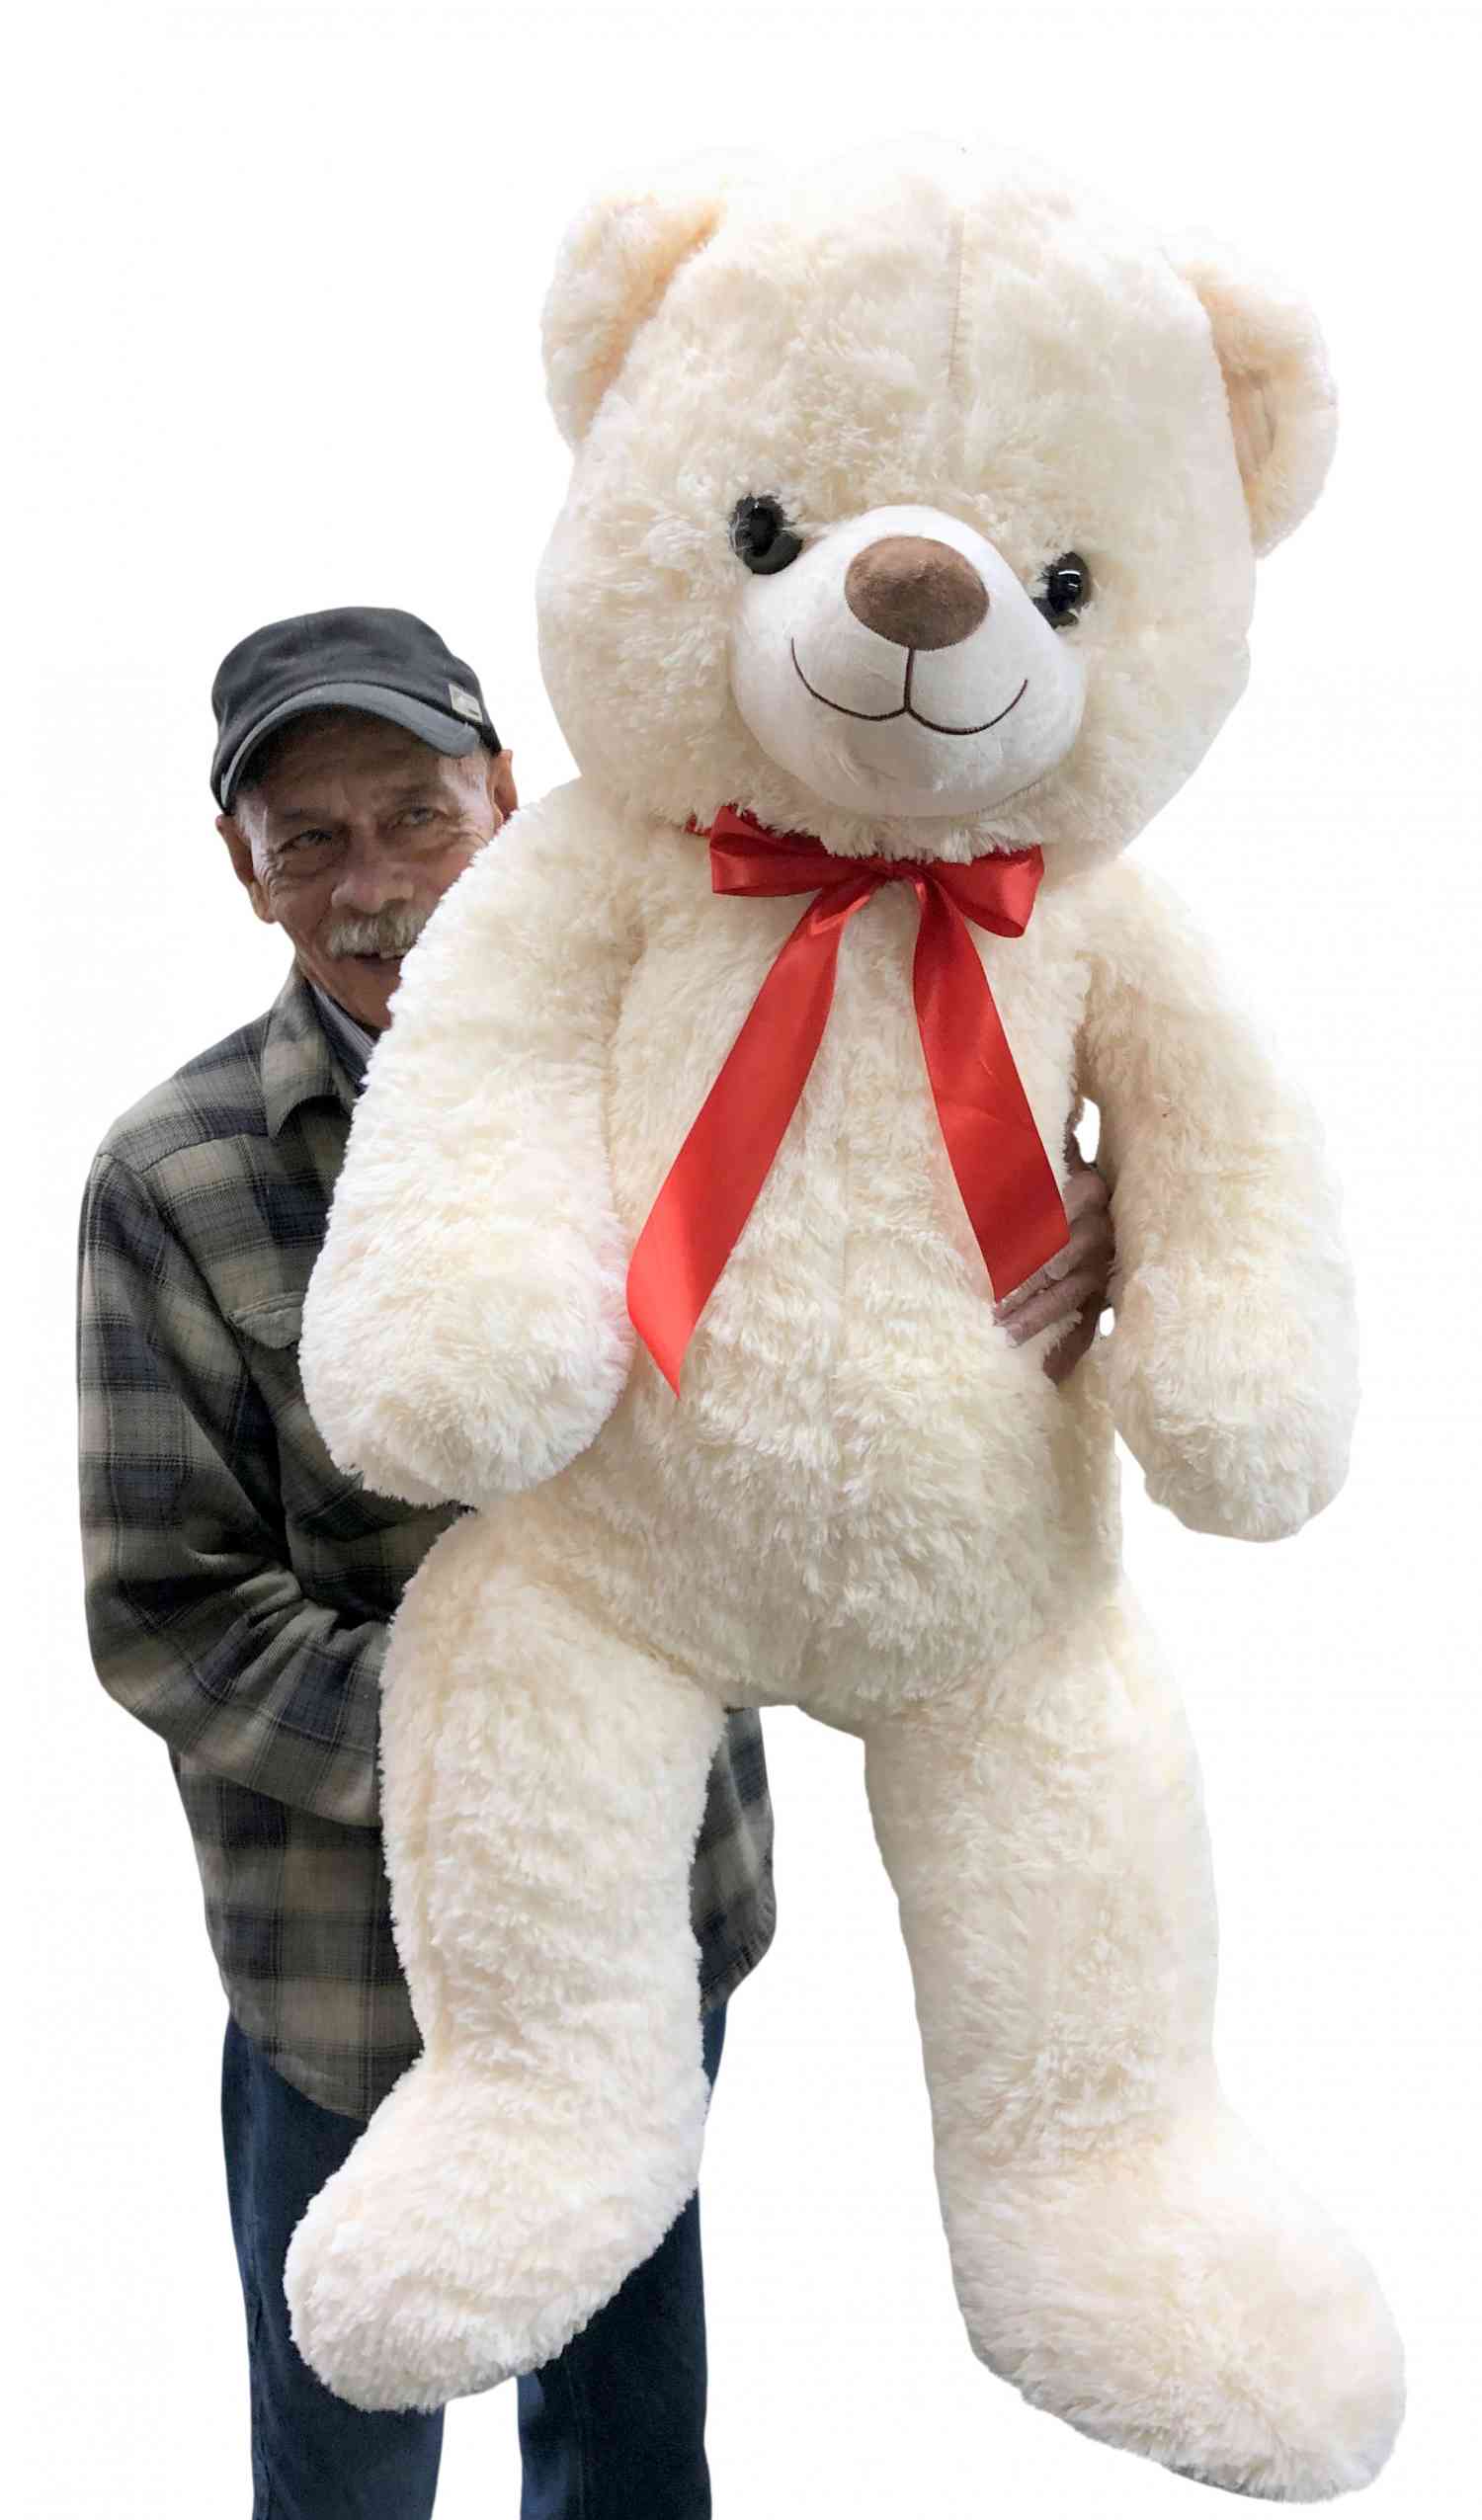 5ft Get Well Soon Teddy Bears With Custom Shirt And Bandage